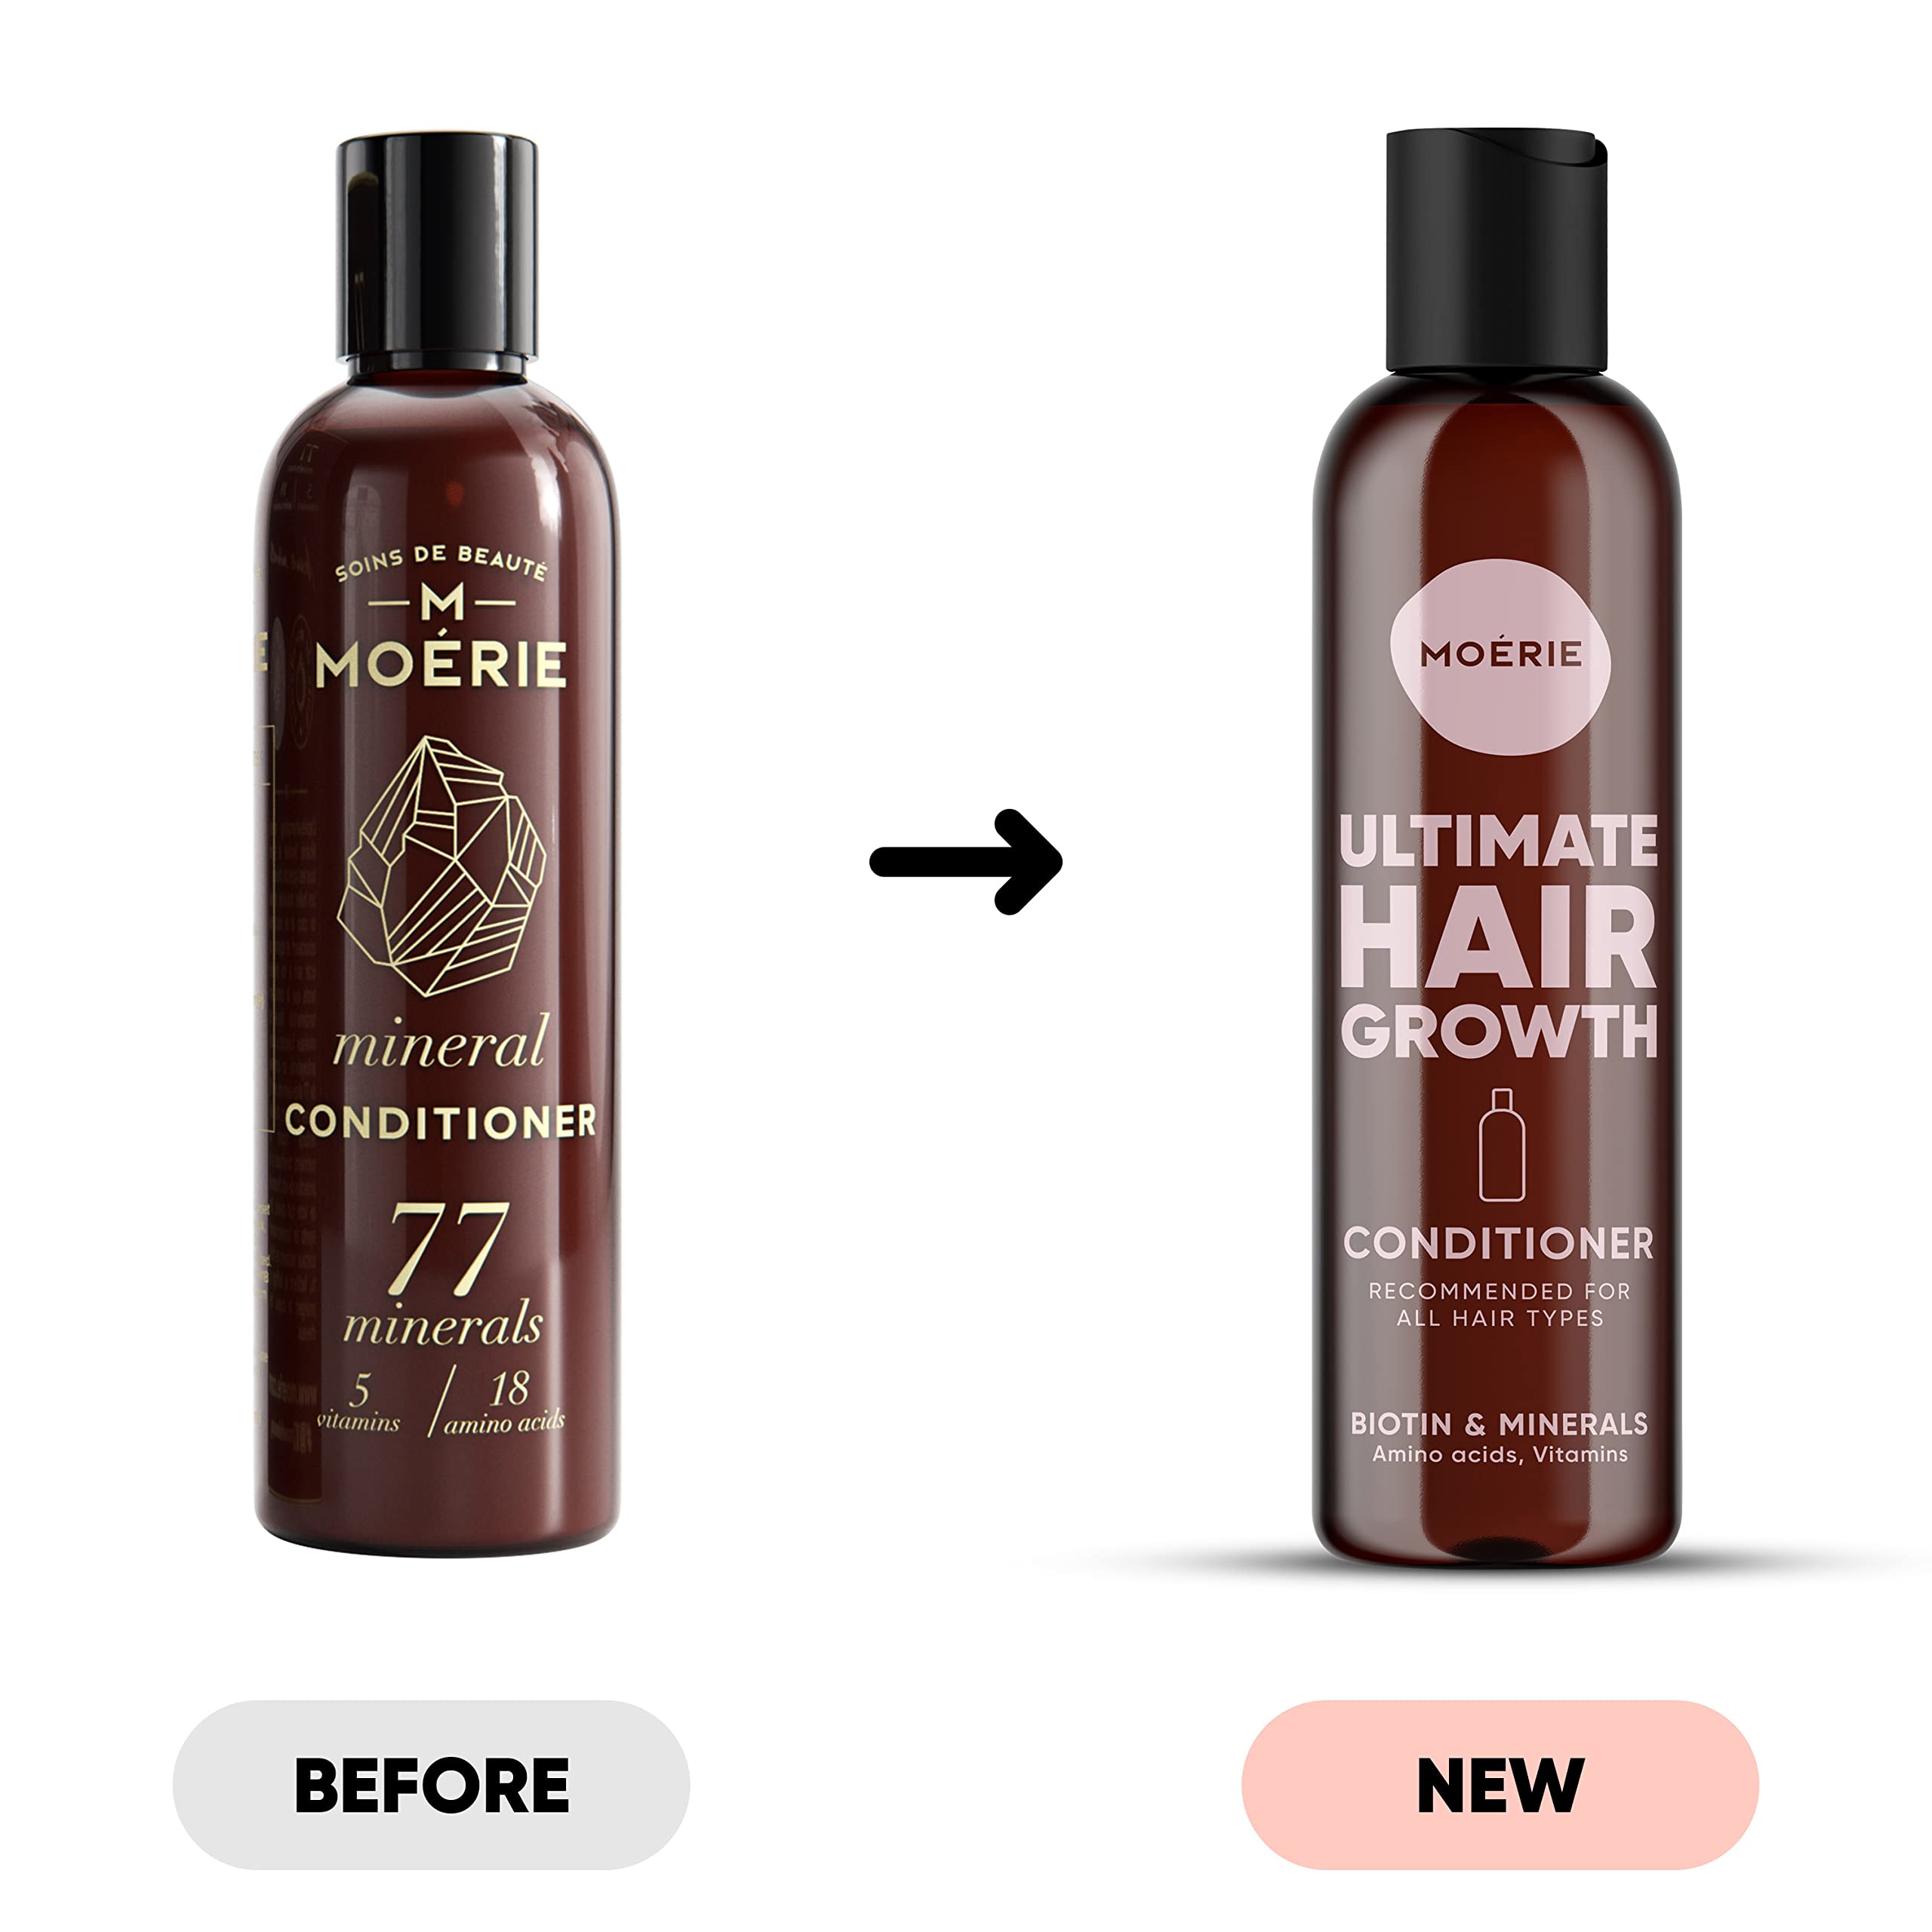 Moerie Ultimate Hair Growth Conditioner – For Longer, Thicker, Fuller Hair - Vegan Friendly Volumizing Hair Products – Paraben & Silicone Free – All Hair Types – Reverse Hair Loss – 8.45 fl oz (250ml)